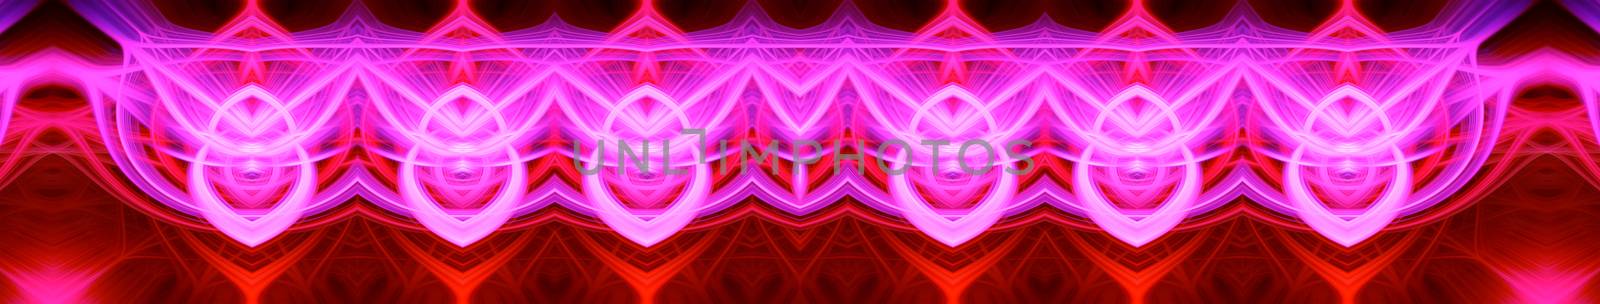 Beautiful abstract intertwined glowing 3d fibers forming a shape of pointy domes, sparkle, flame, flower, interlinked hearts. Purple, maroon, pink, and red colors. Banner size. Illustration.